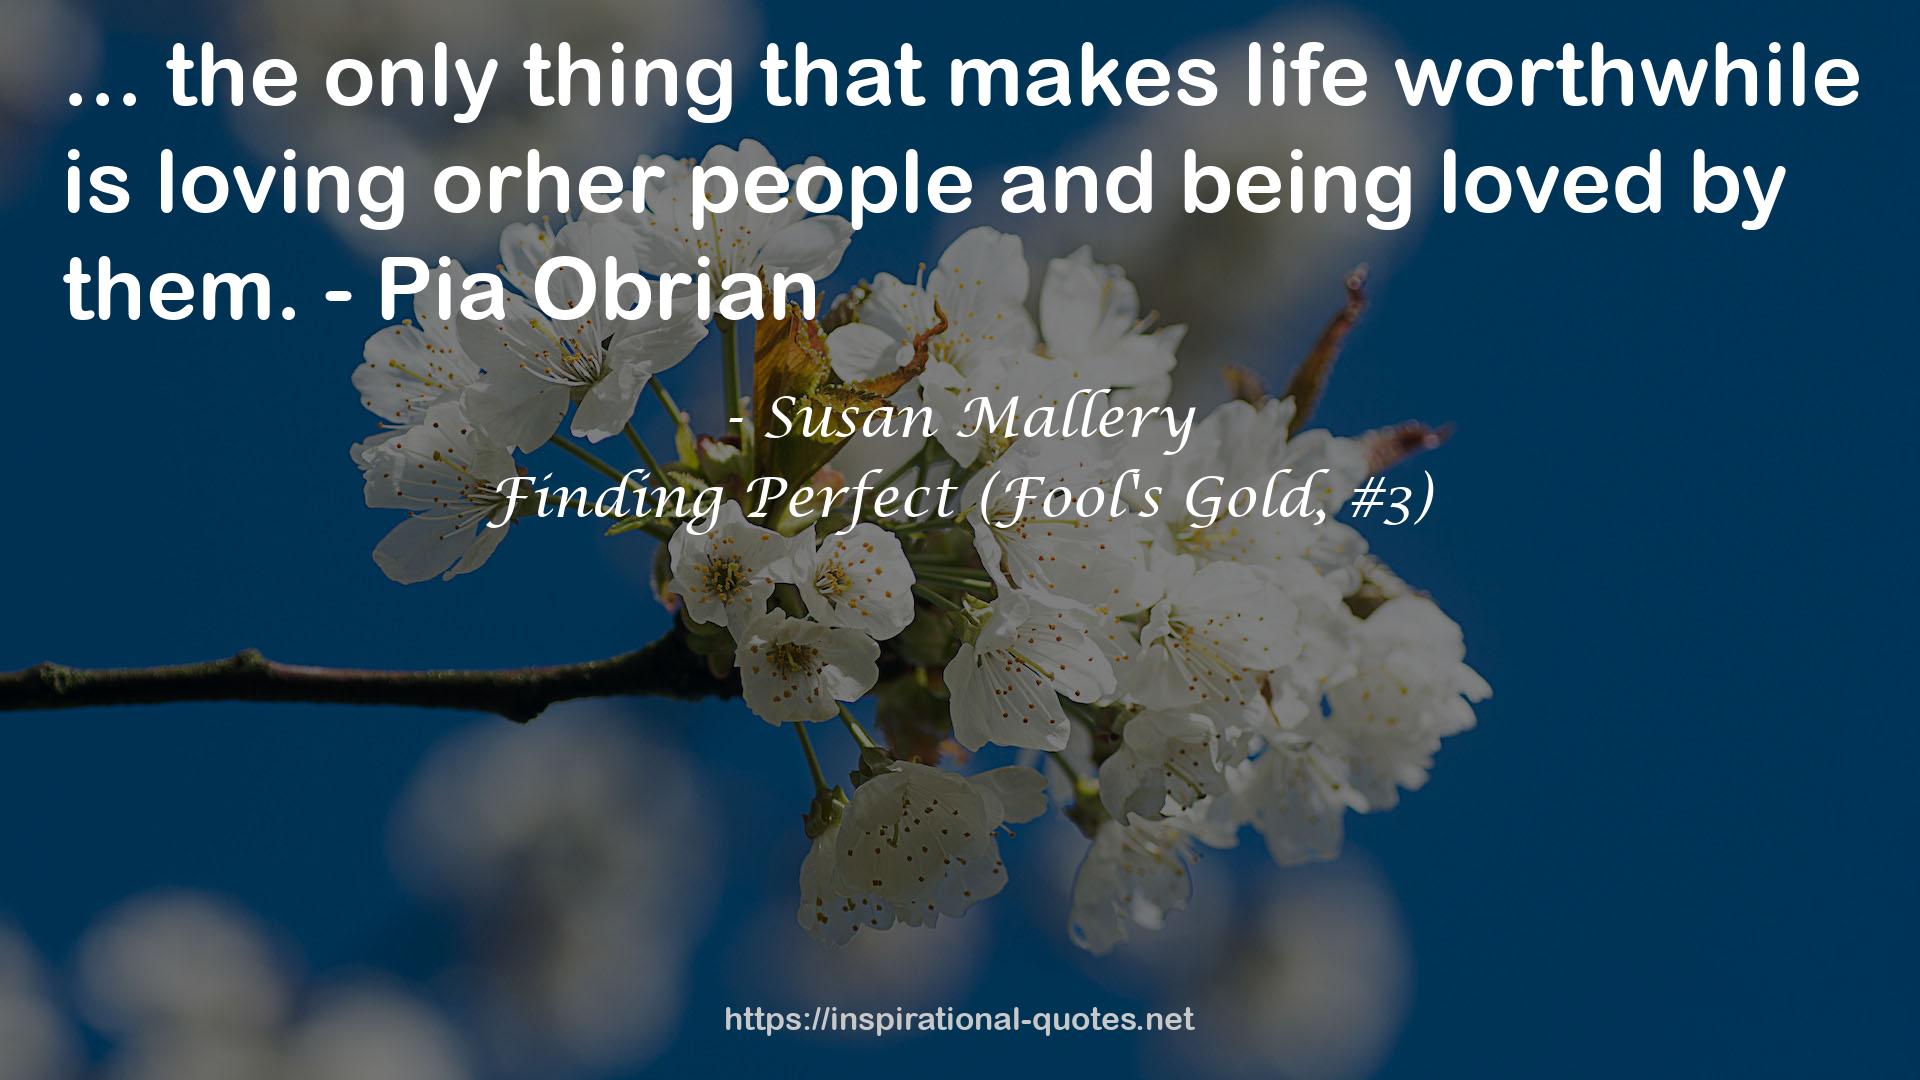 Finding Perfect (Fool's Gold, #3) QUOTES